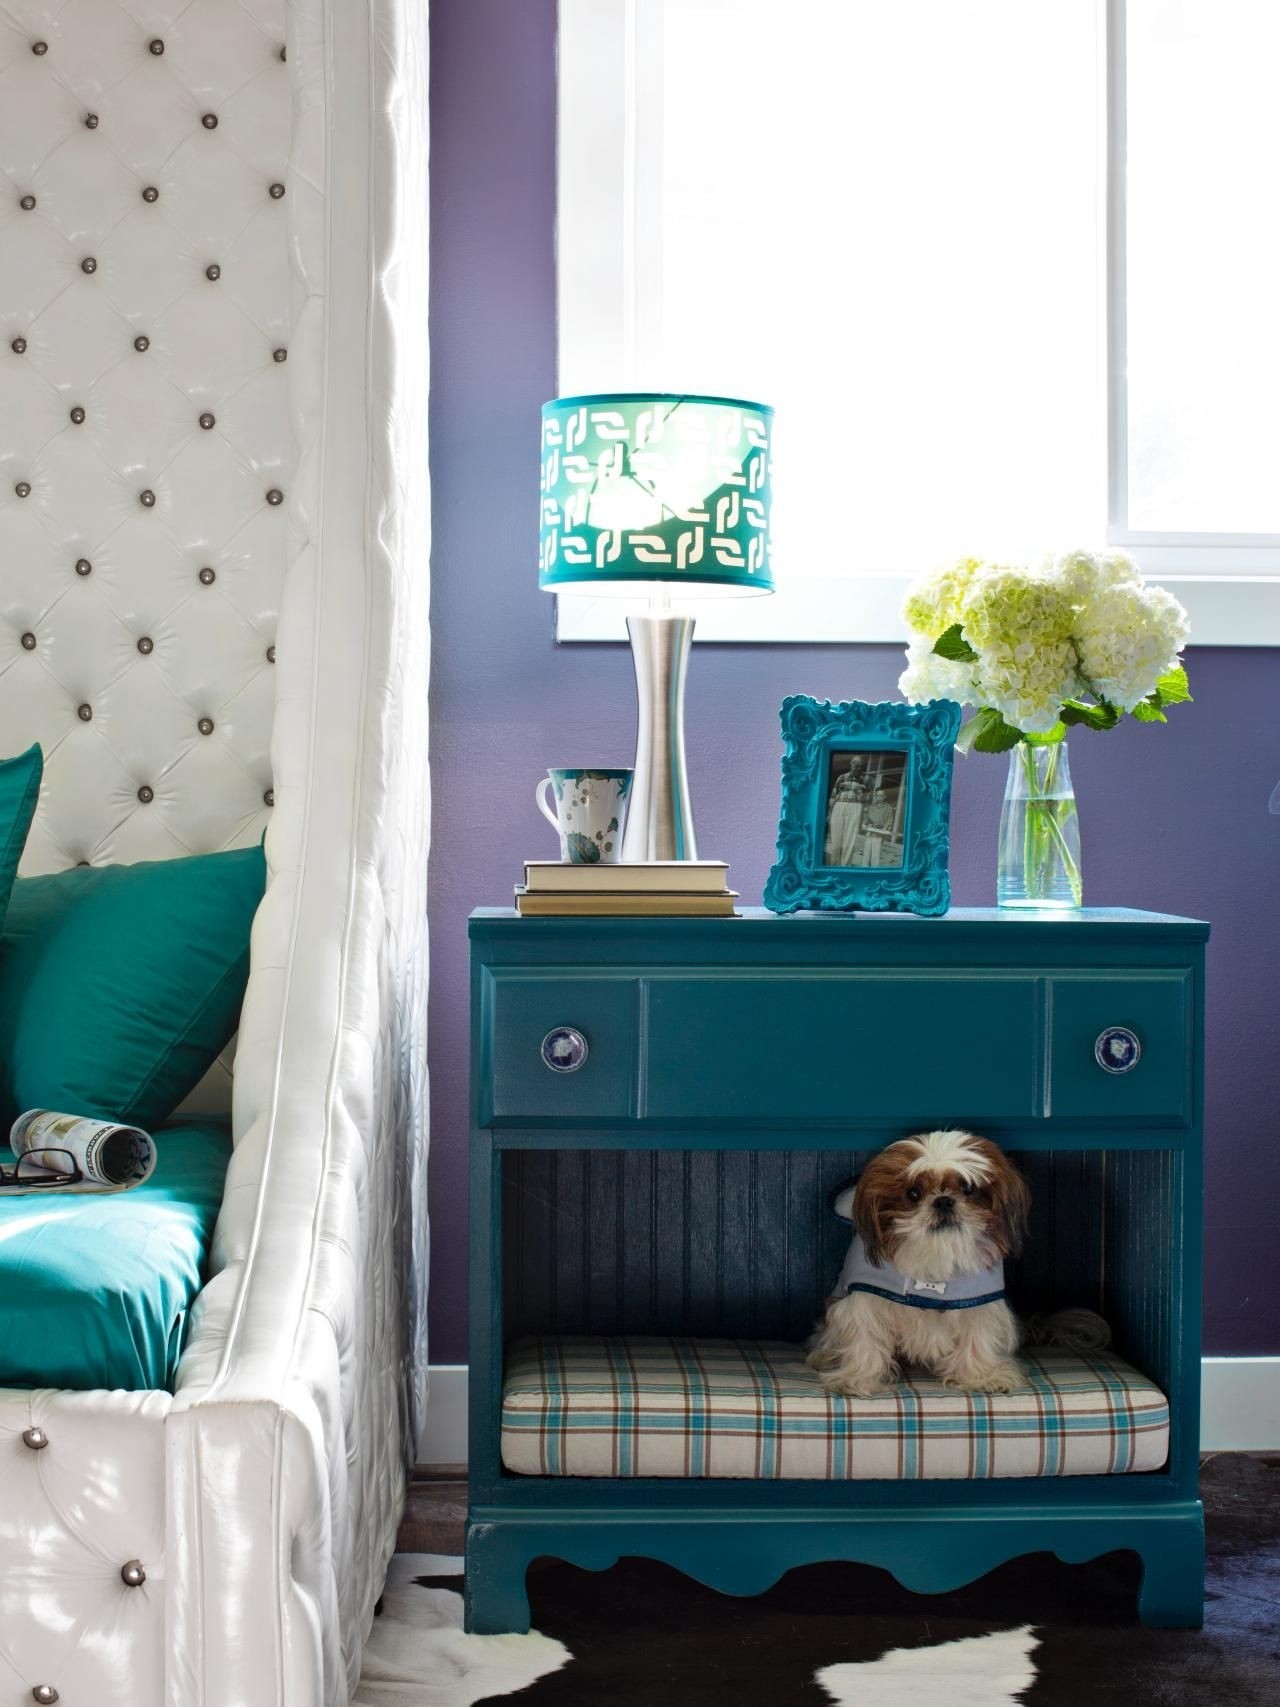 How to turn old furniture into new pet beds